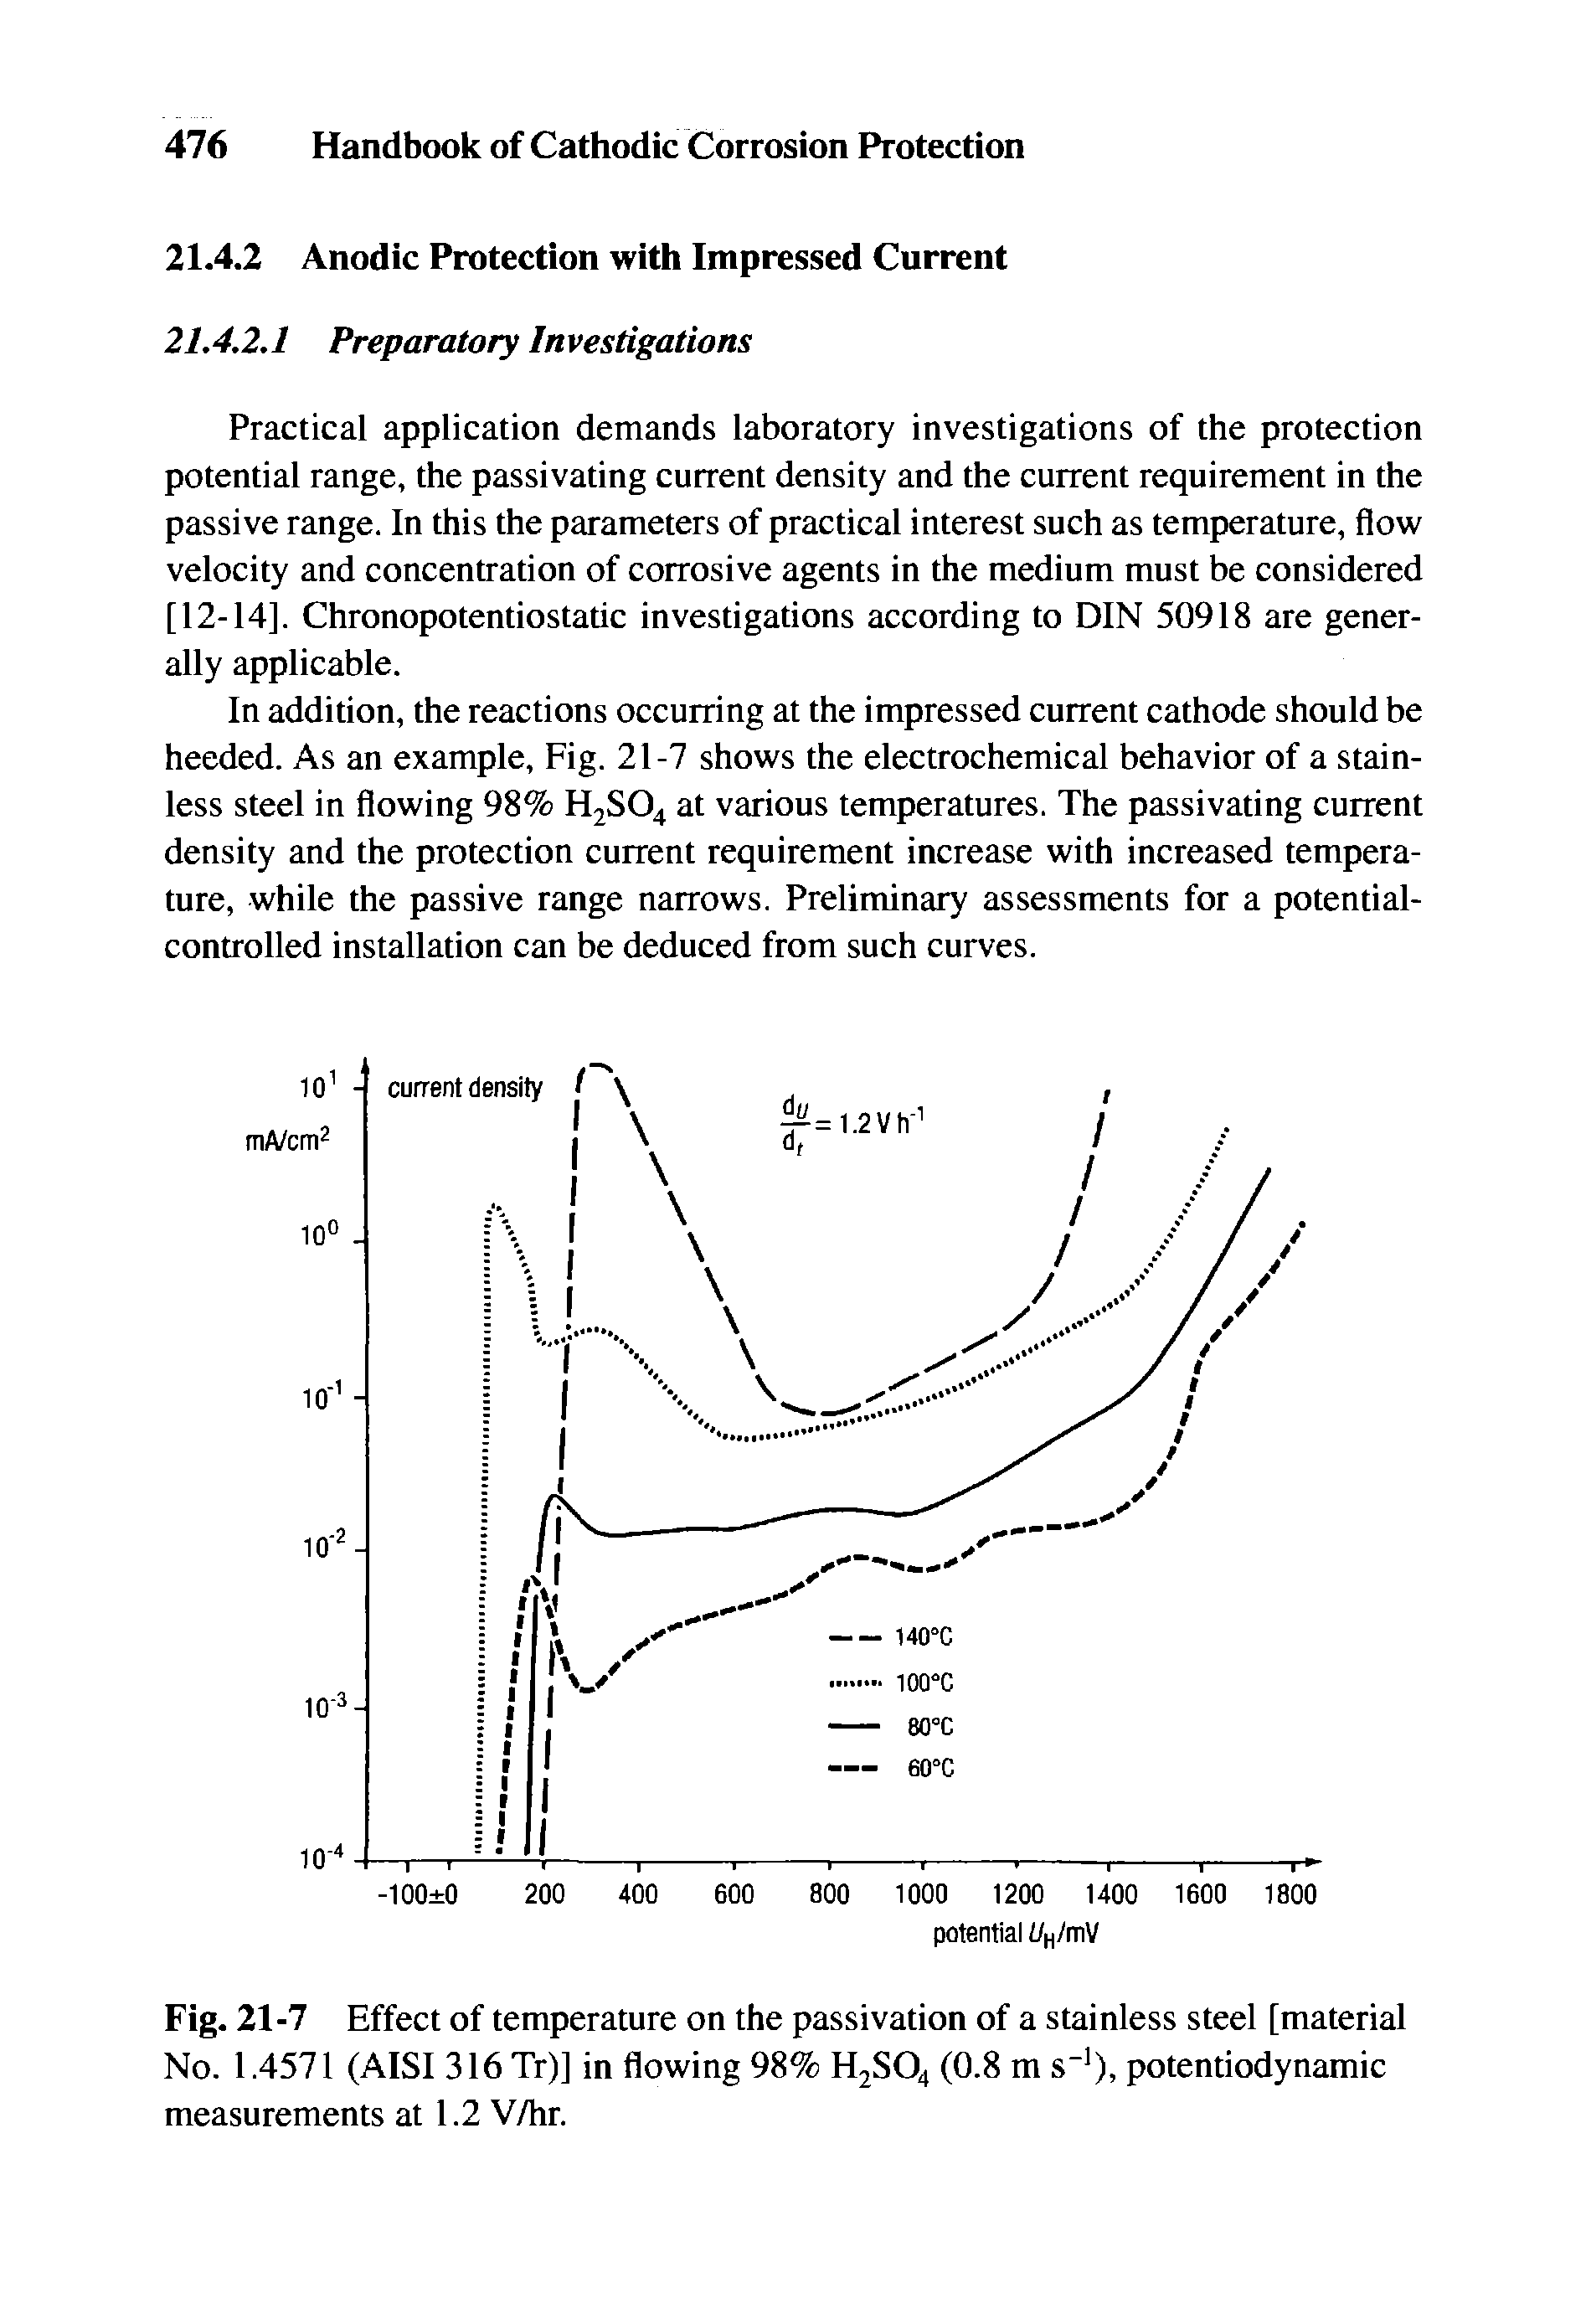 Fig. 21-7 Effect of temperature on the passivation of a stainless steel [material No. 1.4571 (AISI 316 Tr)J in flowing 98% H2SO4 (0.8 m s ), potentiodynamic measurements at 1.2 V/hr.